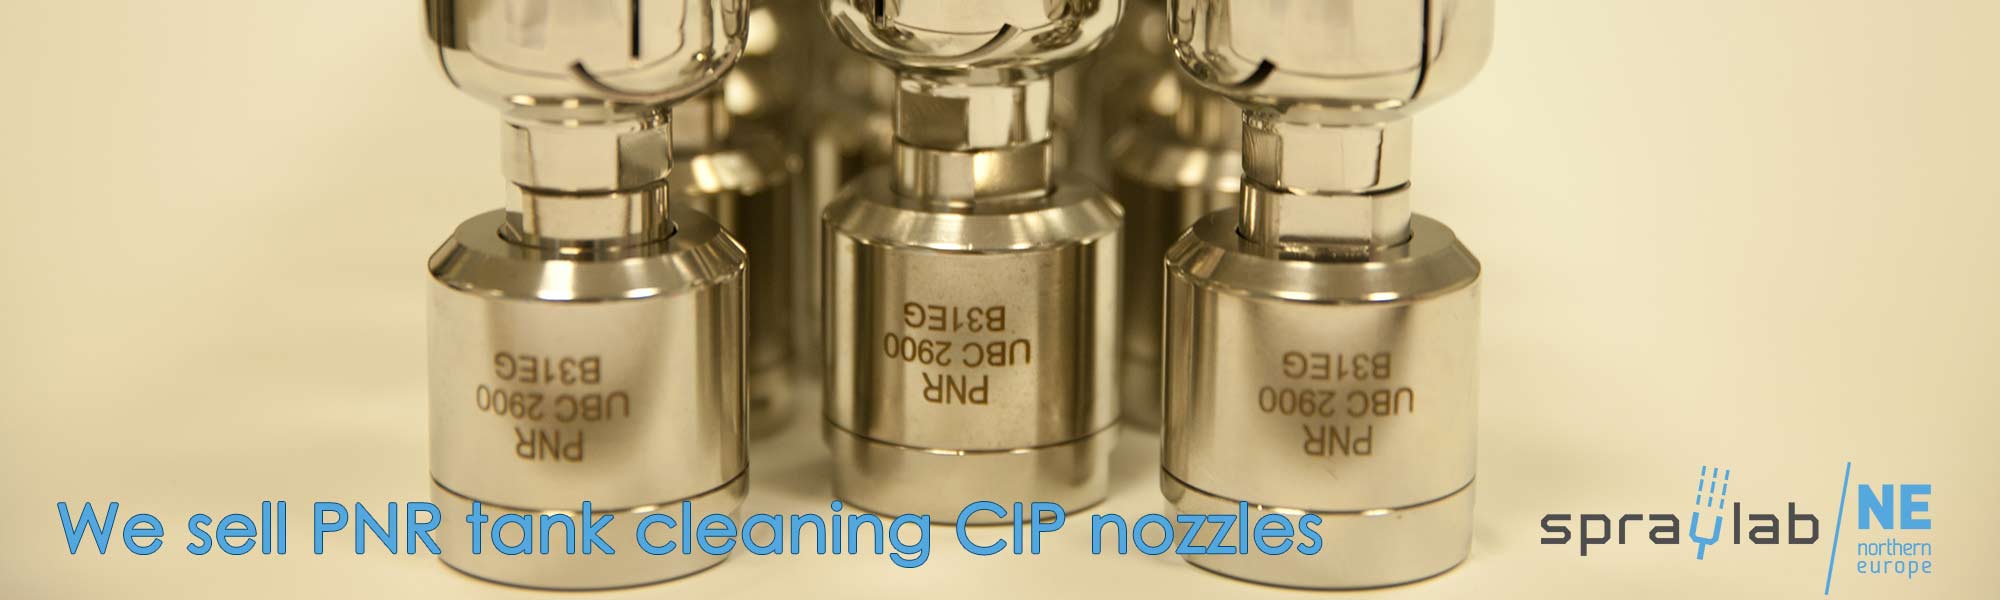 We sell PNR tank cleaning CIP nozzles